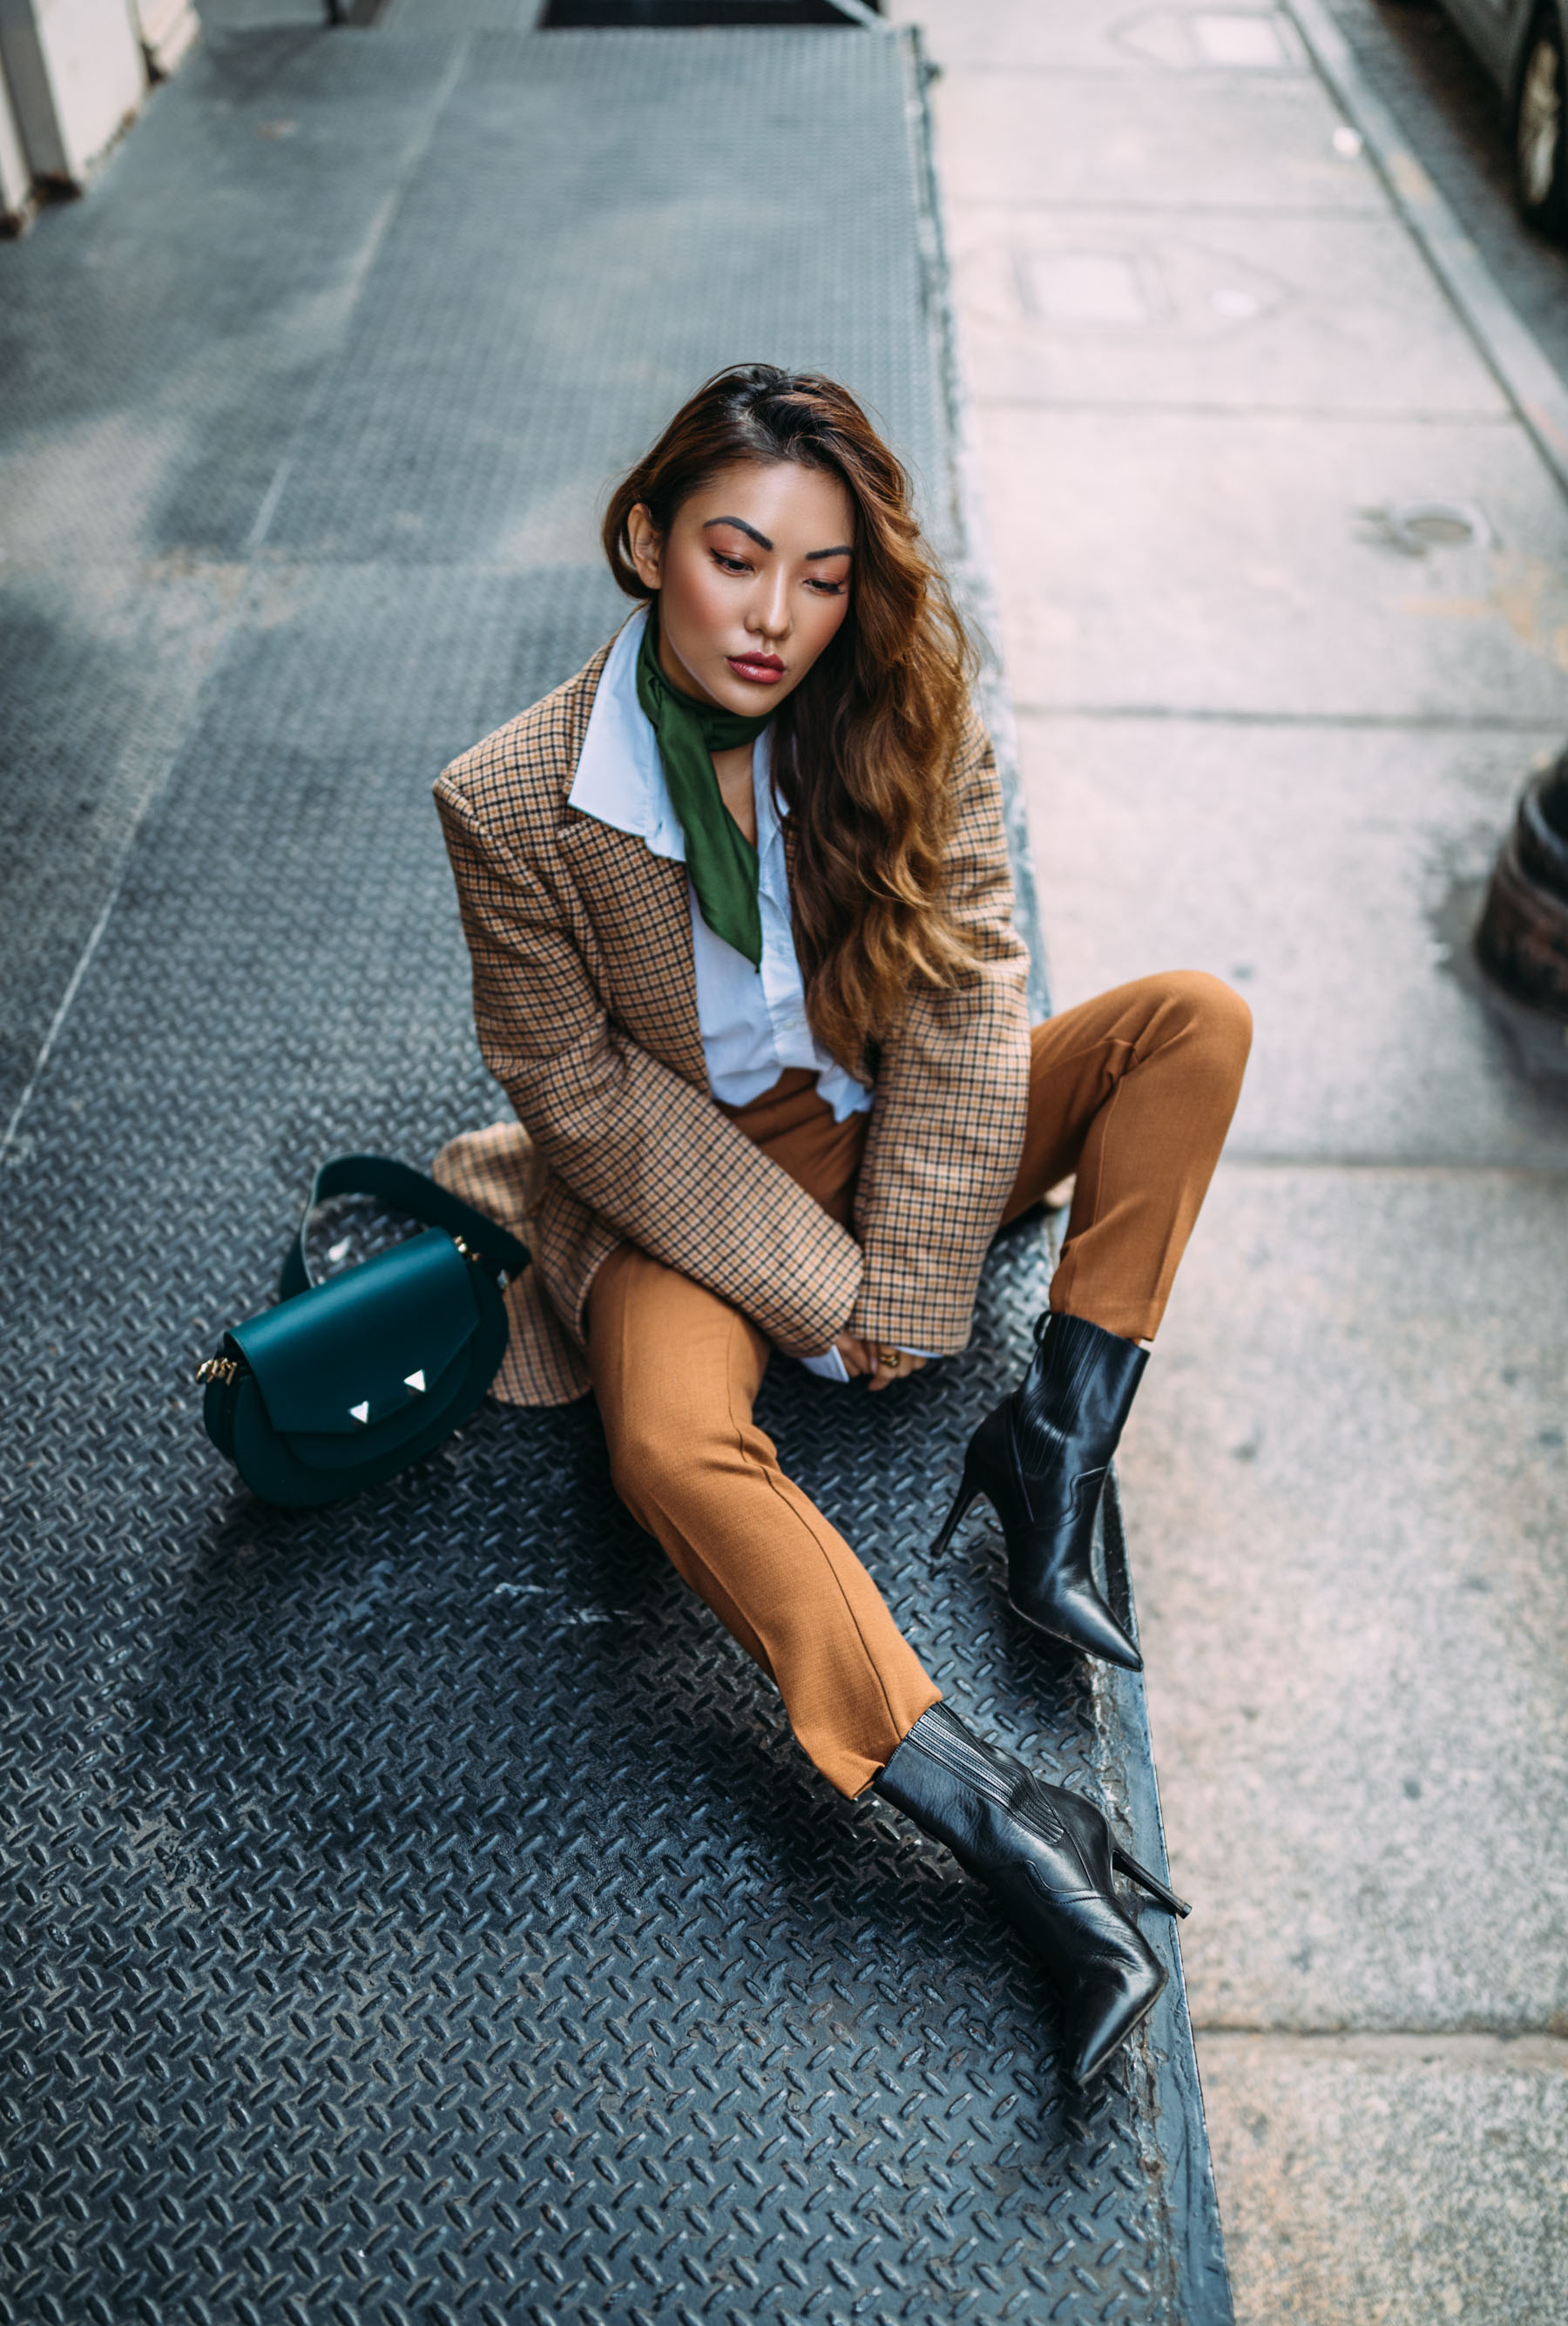 4 Key Pieces to Pull Off Menswear-Inspired Outfit // Notjessfashion.com // NYC fashion blogger, top fashion blogger, asian blogger, oversized blazer, plaid blazer, menswear inspired fashion, jessica wang, green accessories, fashion blogger street style